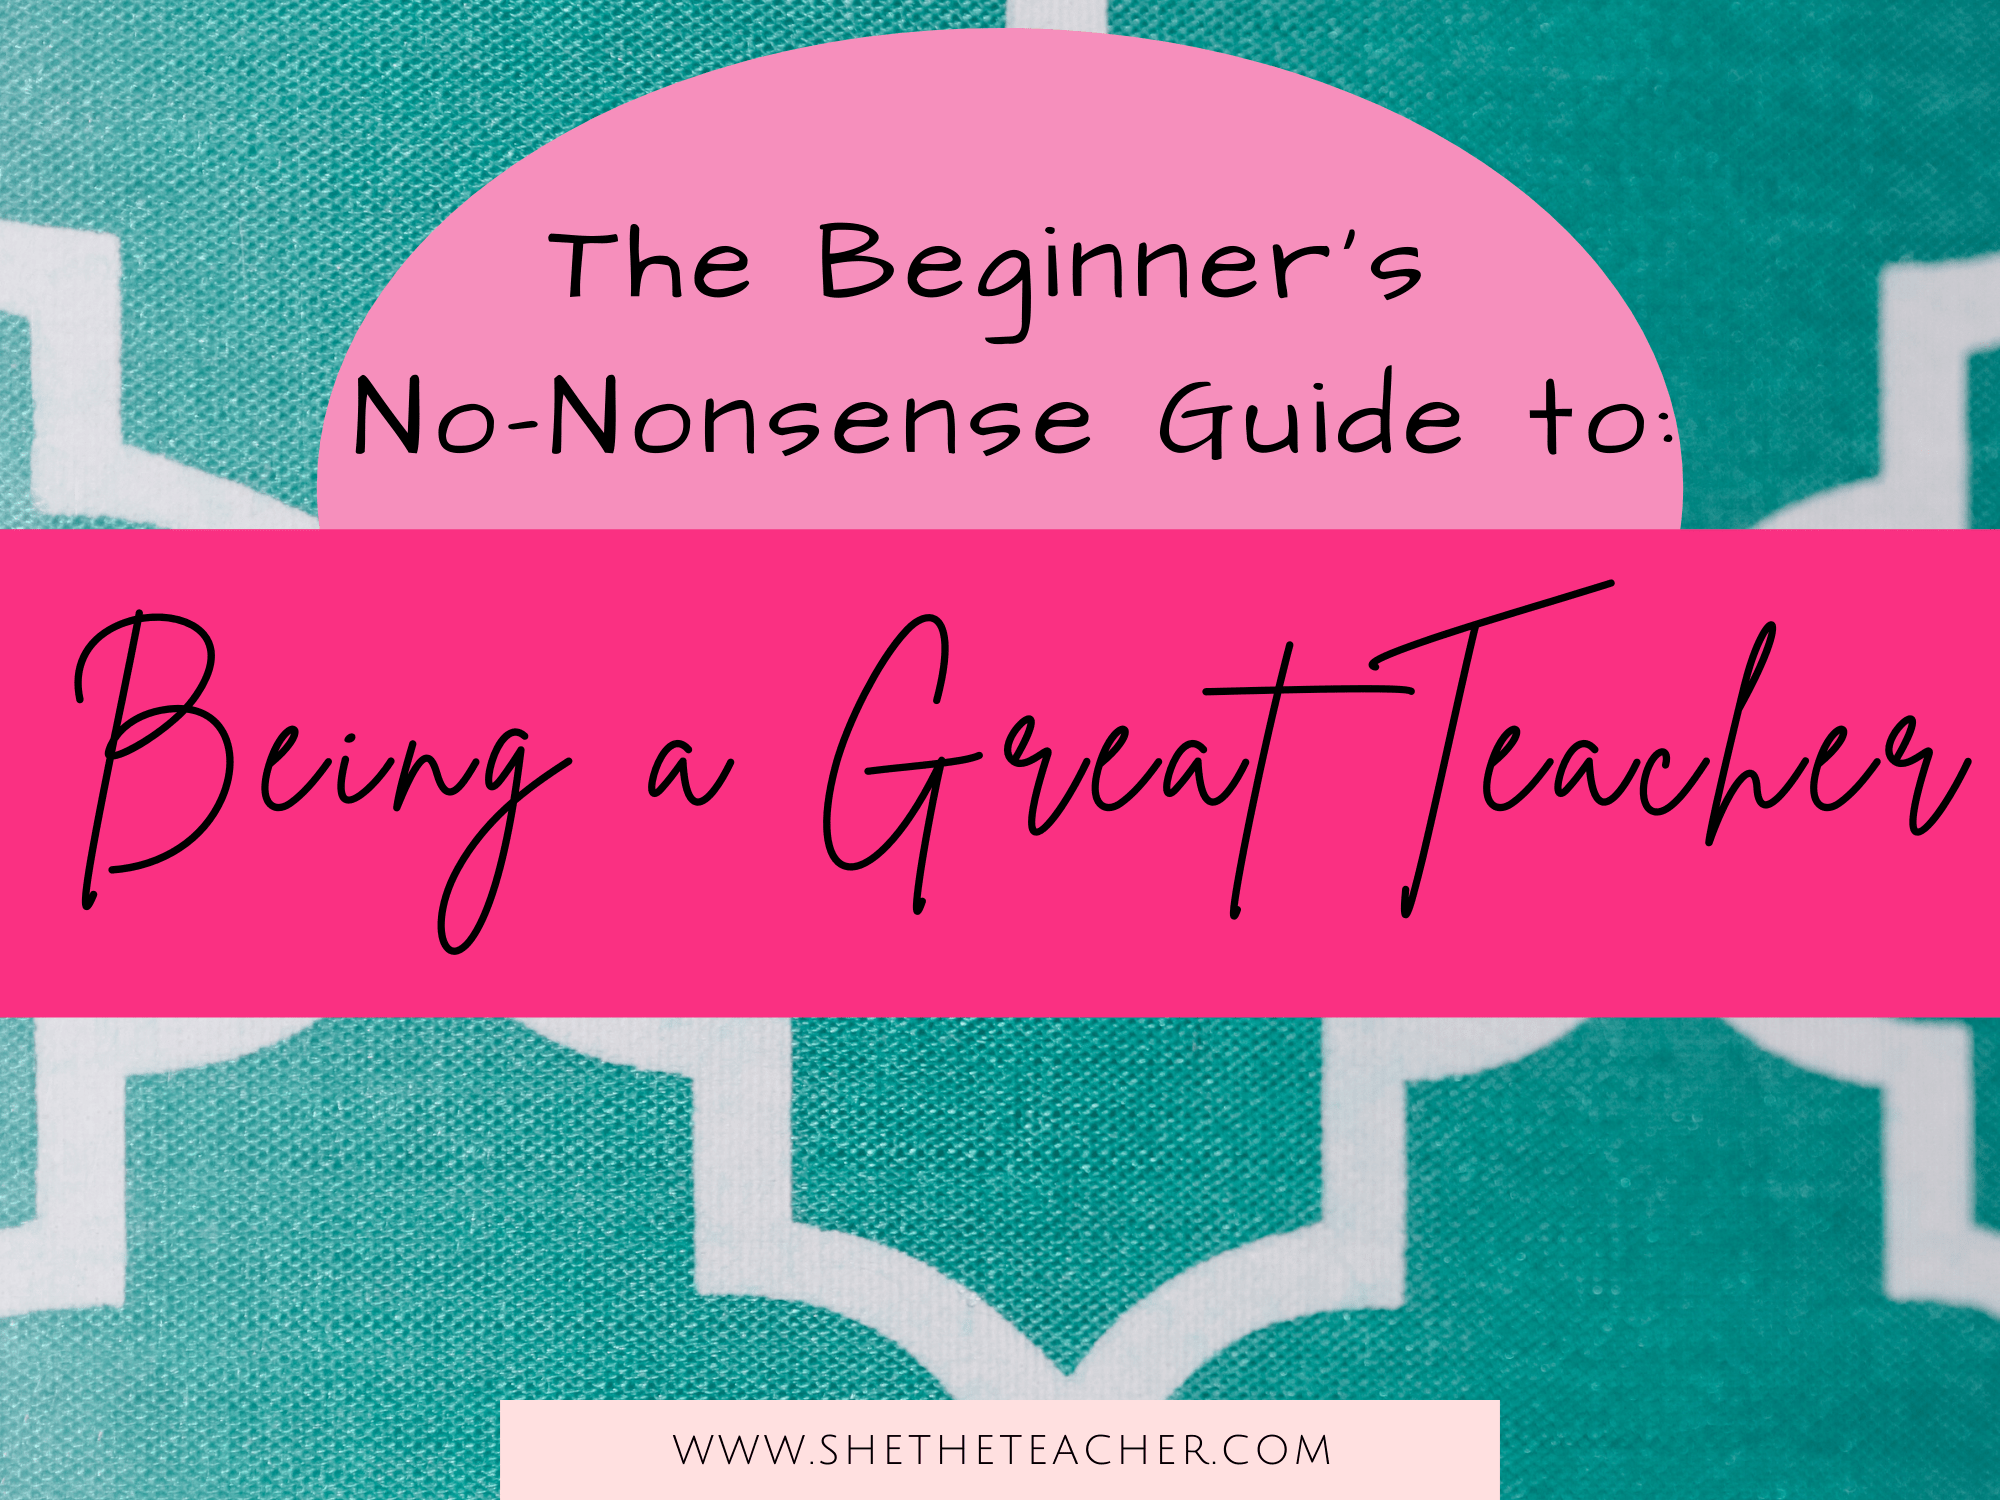 The Beginner's No-Nonsense Guide to Being a Great Teacher - She The Teacher